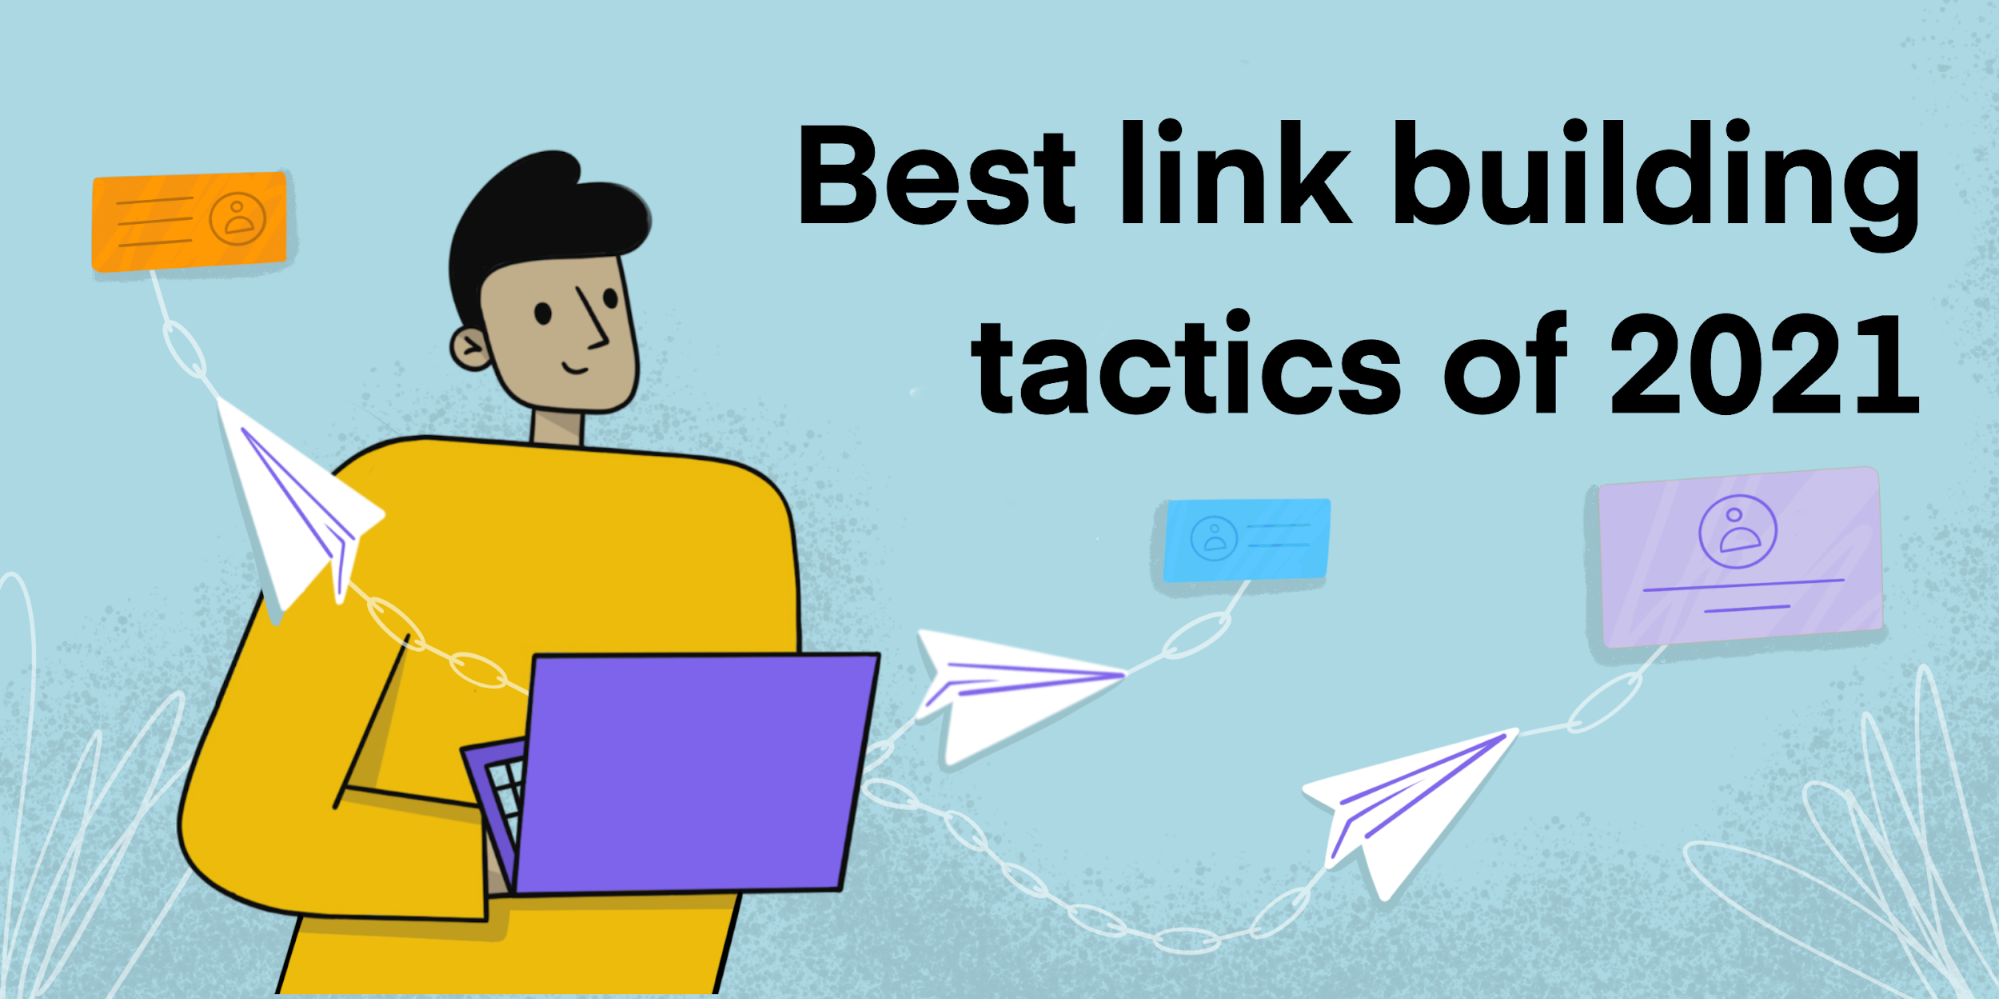 Best Email Outreach And Link Building Tactics According To 12 SEO Experts